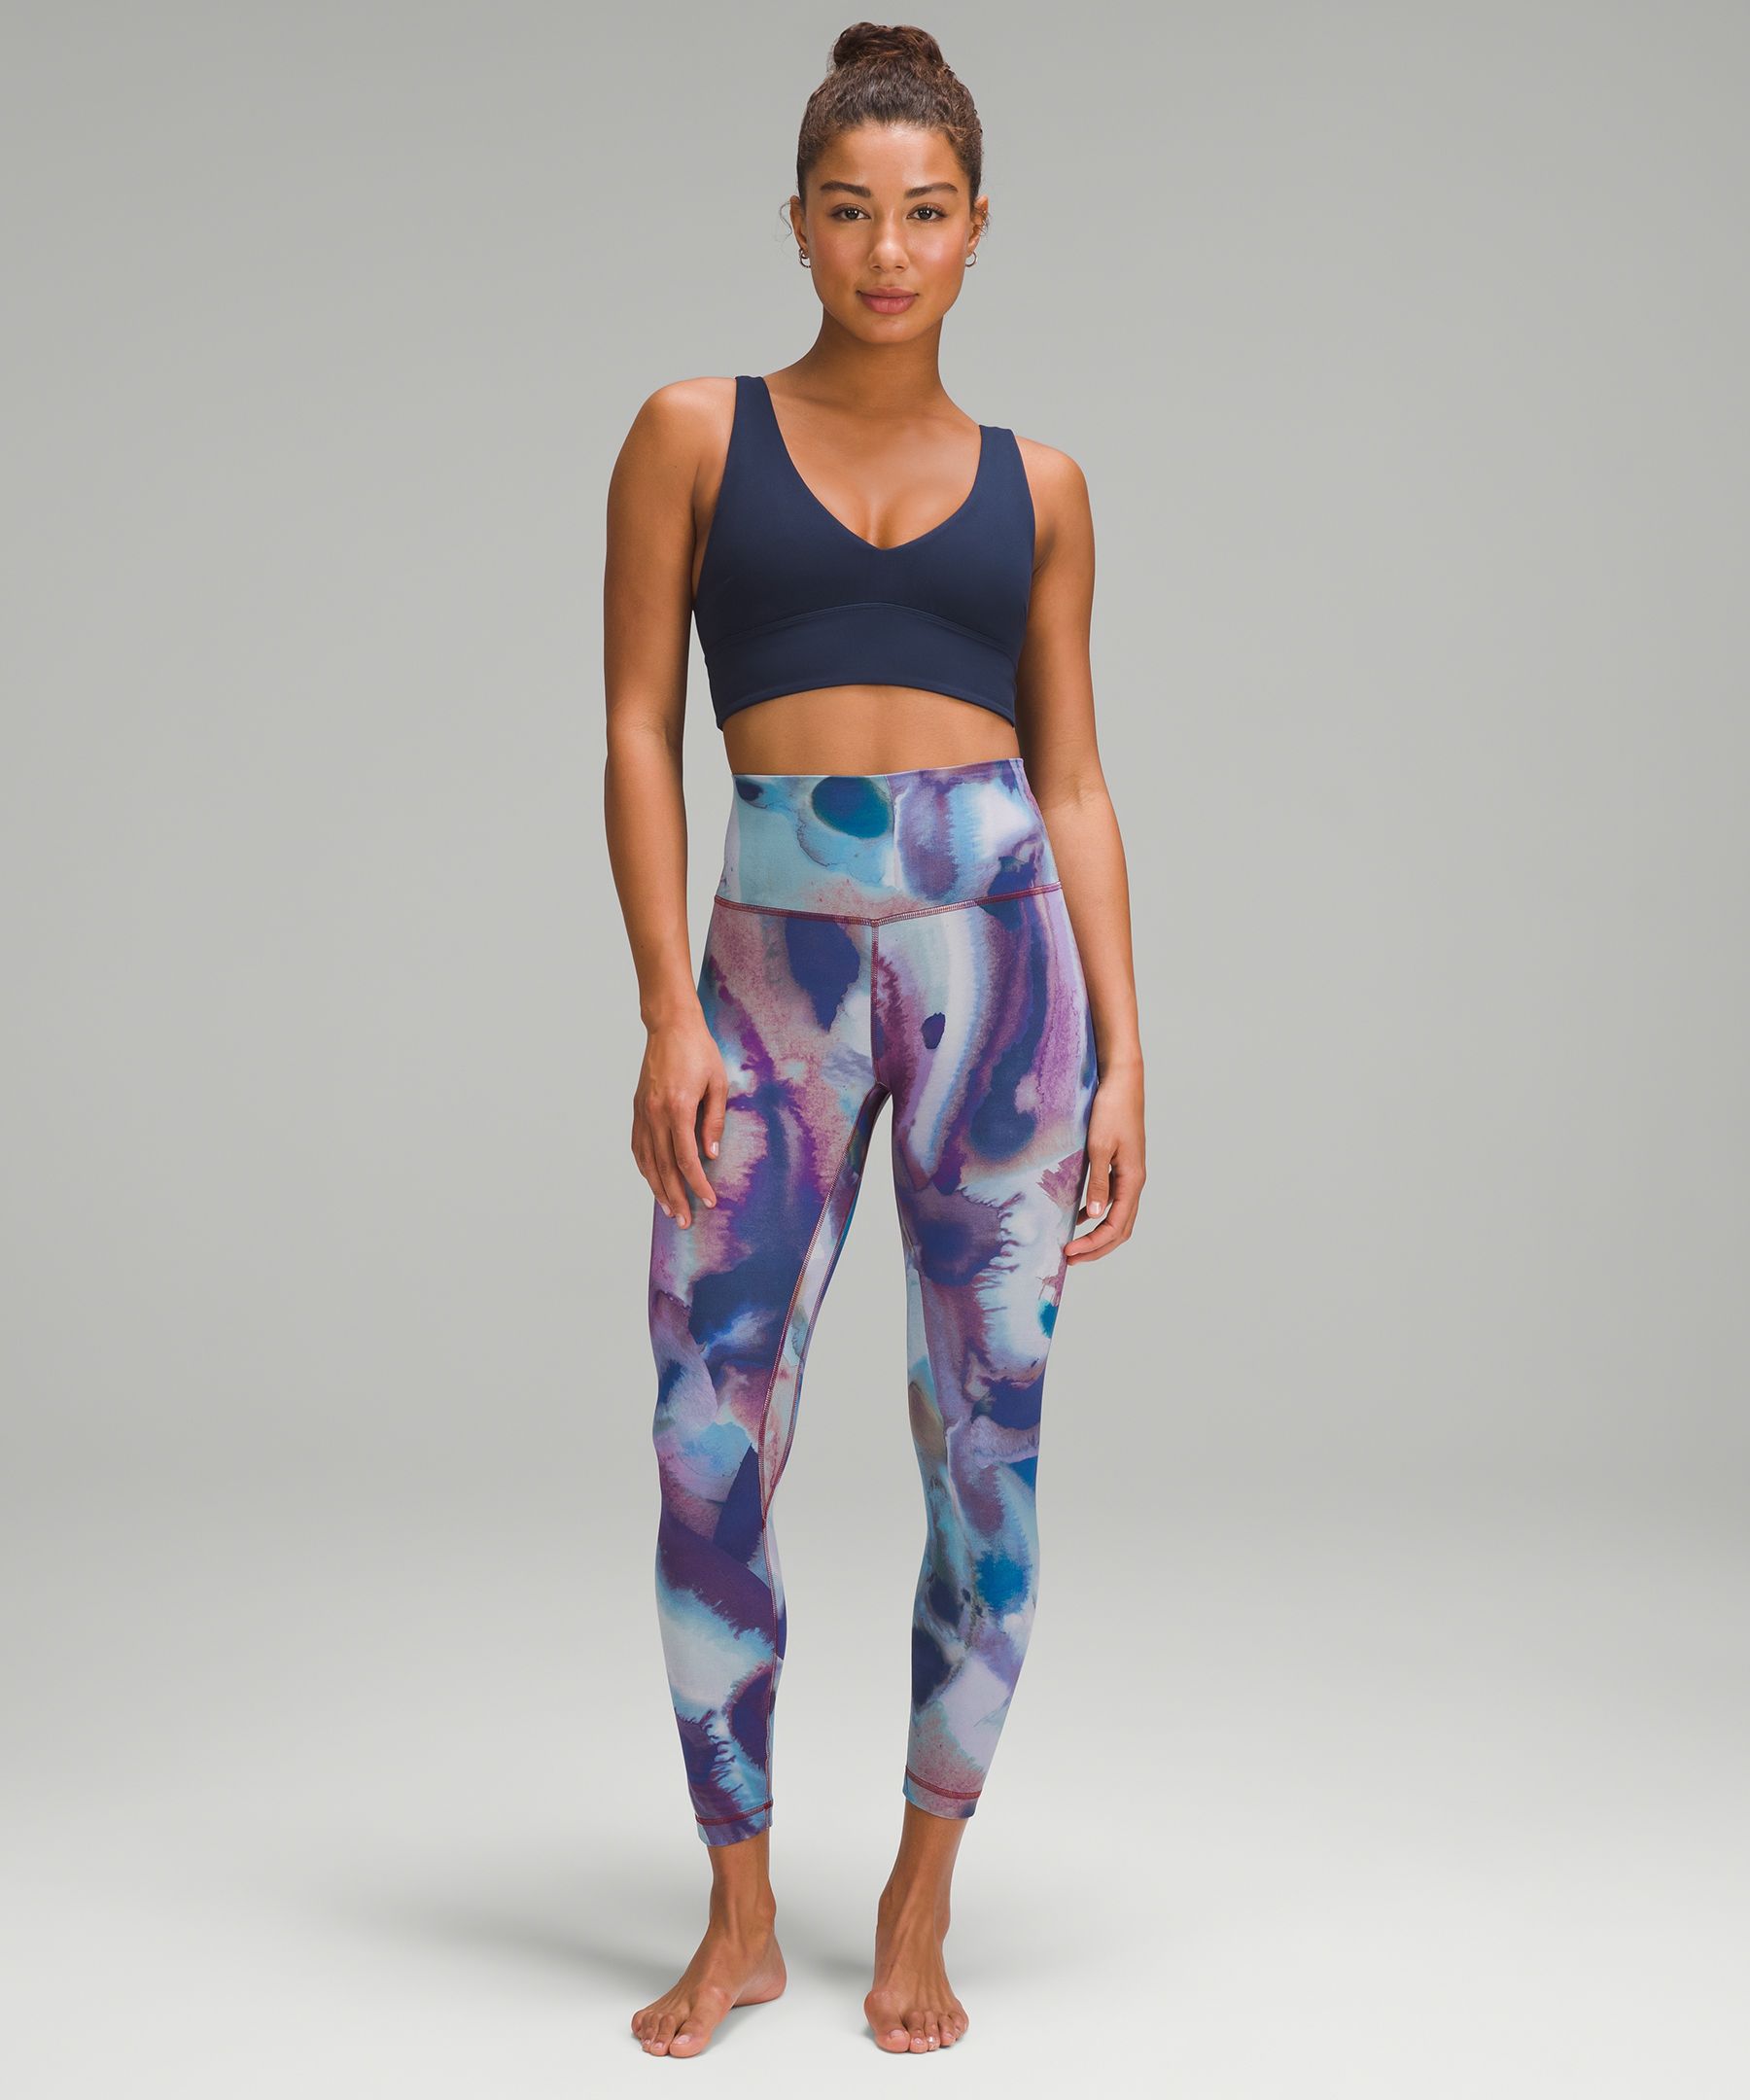 Yoga Clothes for Women